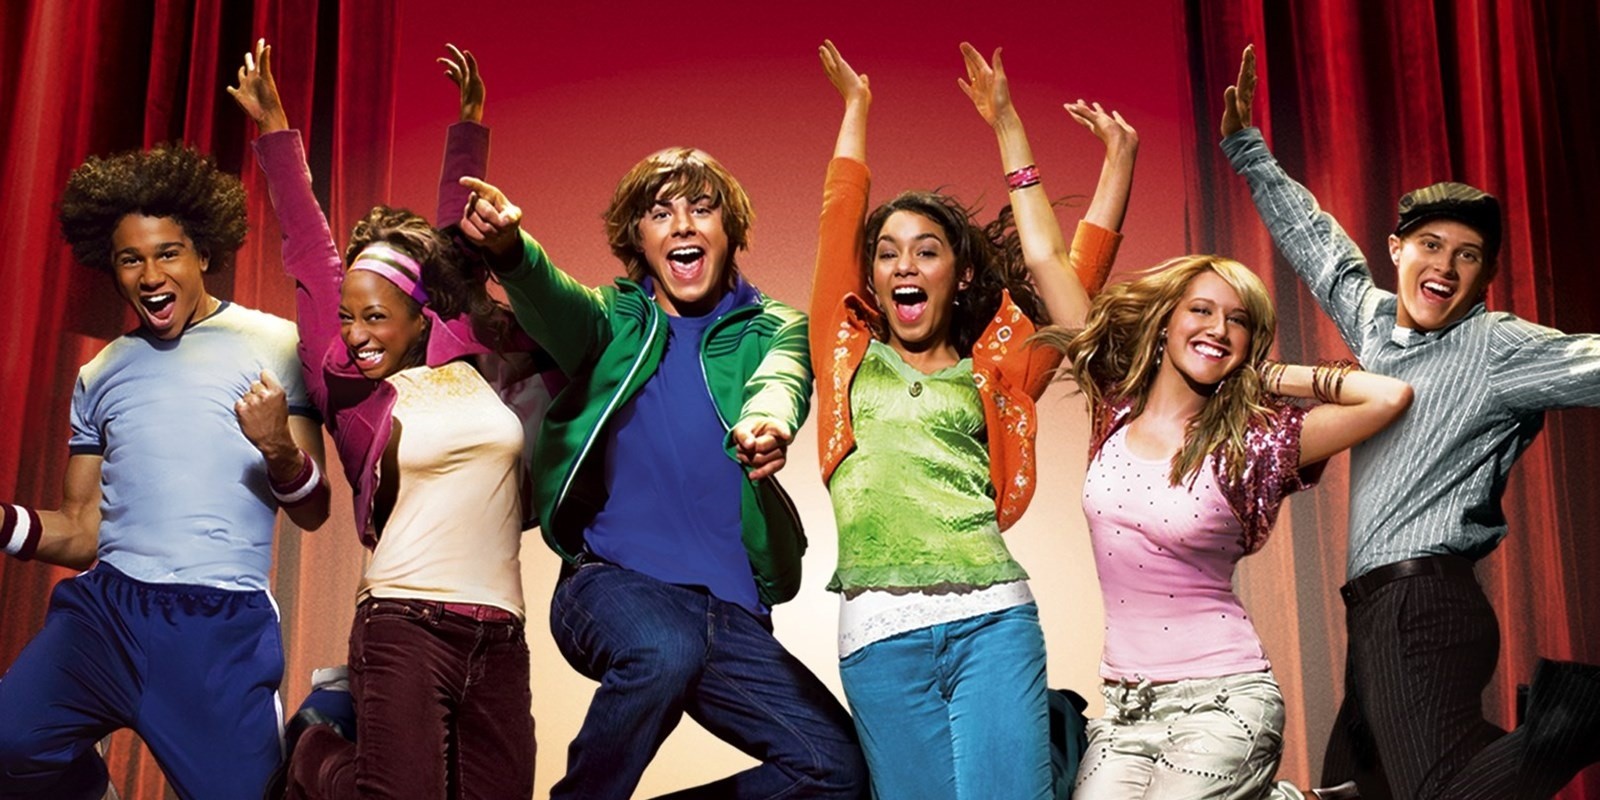 15 songs we love from High School Musical